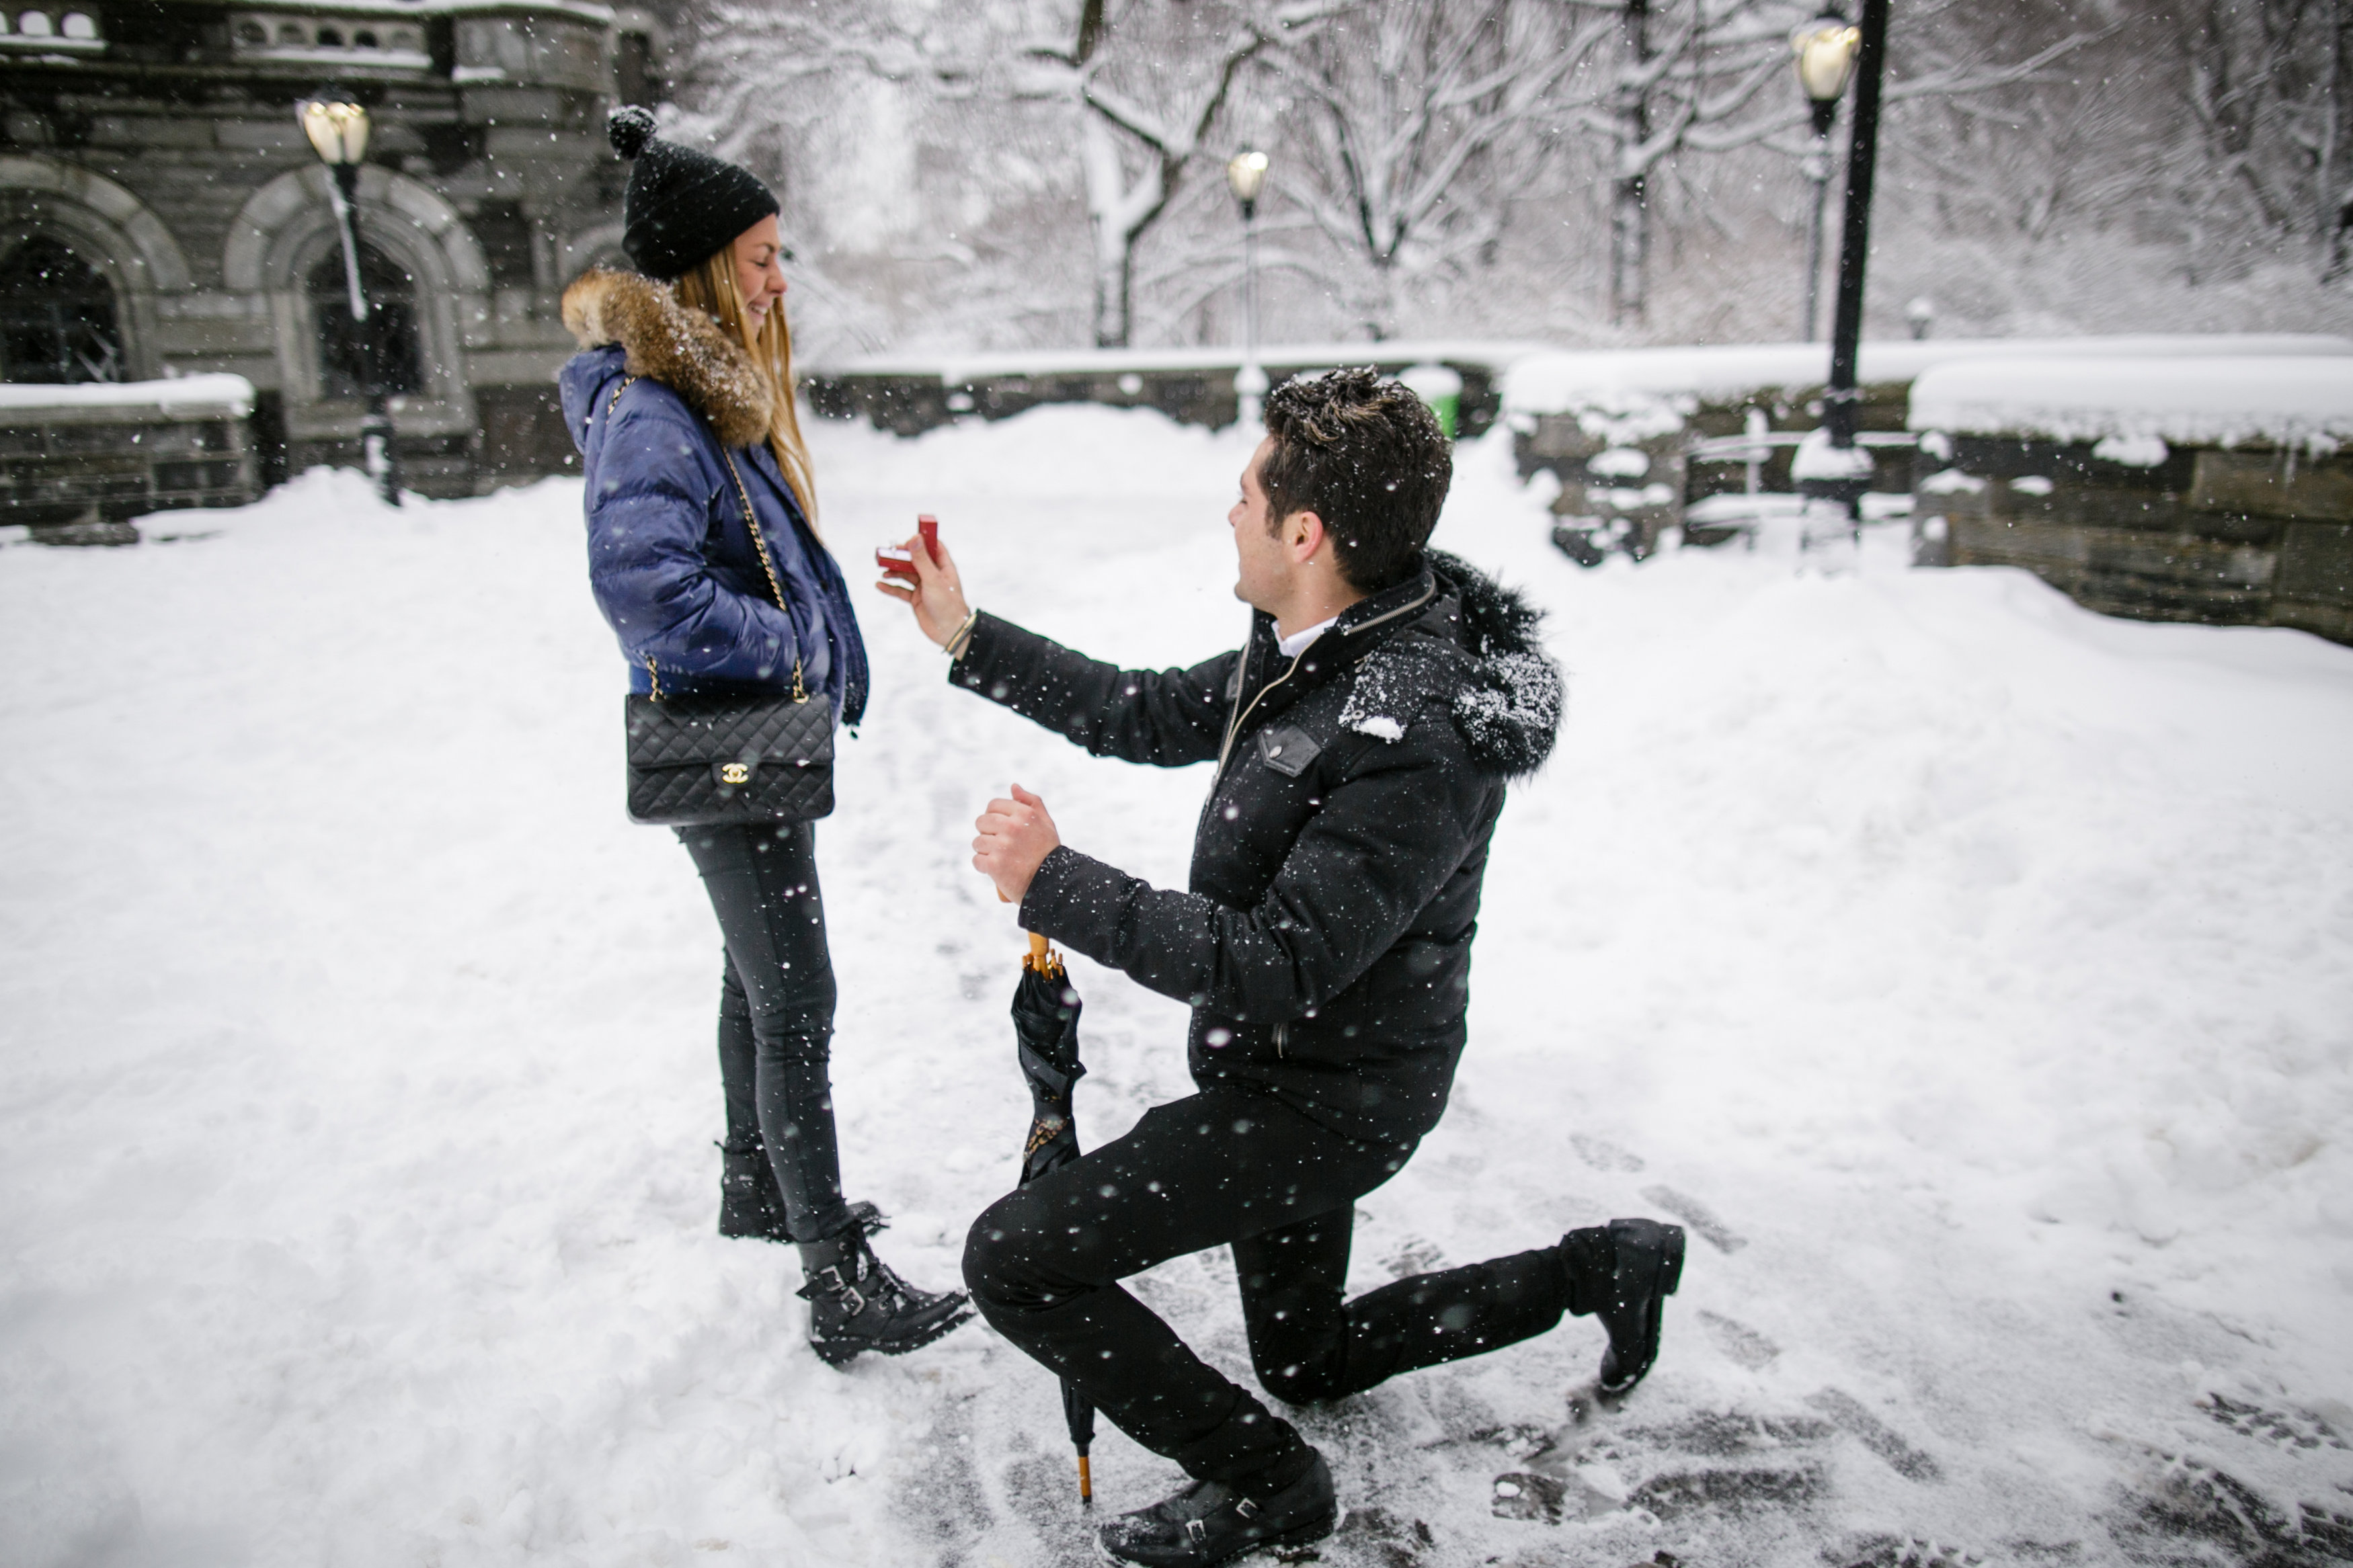 View More: http://bypetronella.pass.us/lolaeliasnycmarriageproposal